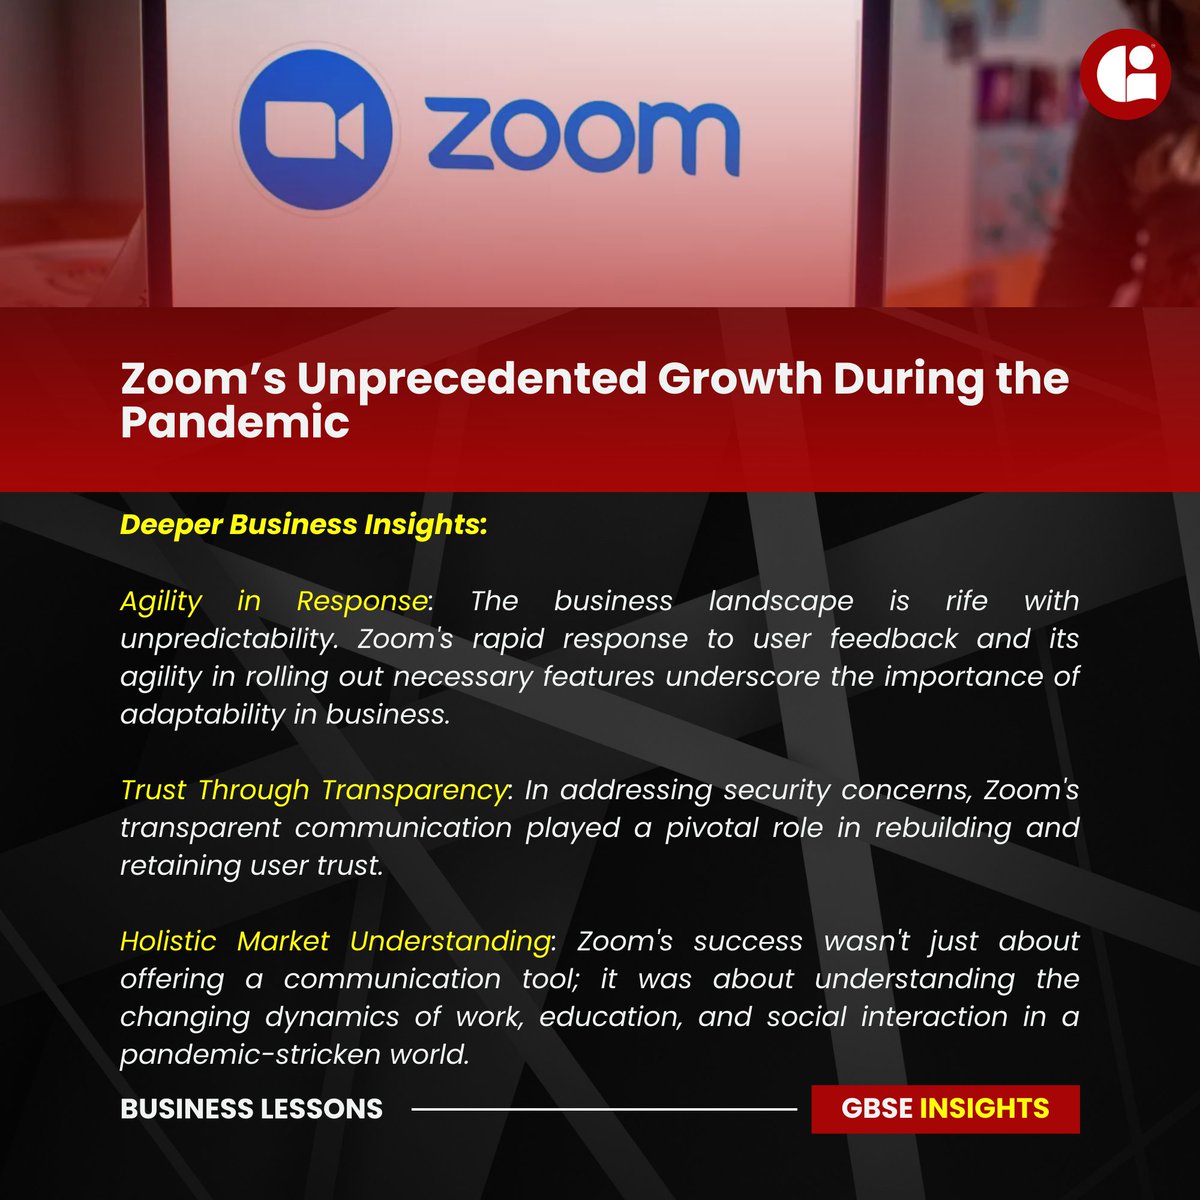 From challenges, leaders like Zoom emerge. We're eager to explore their roadmap and share it with you. And if it sparks ideas for your enterprise, GBSE is here to help fine-tune them. #AdaptiveEntrepreneurship #LessonsFromLeaders #GBSE